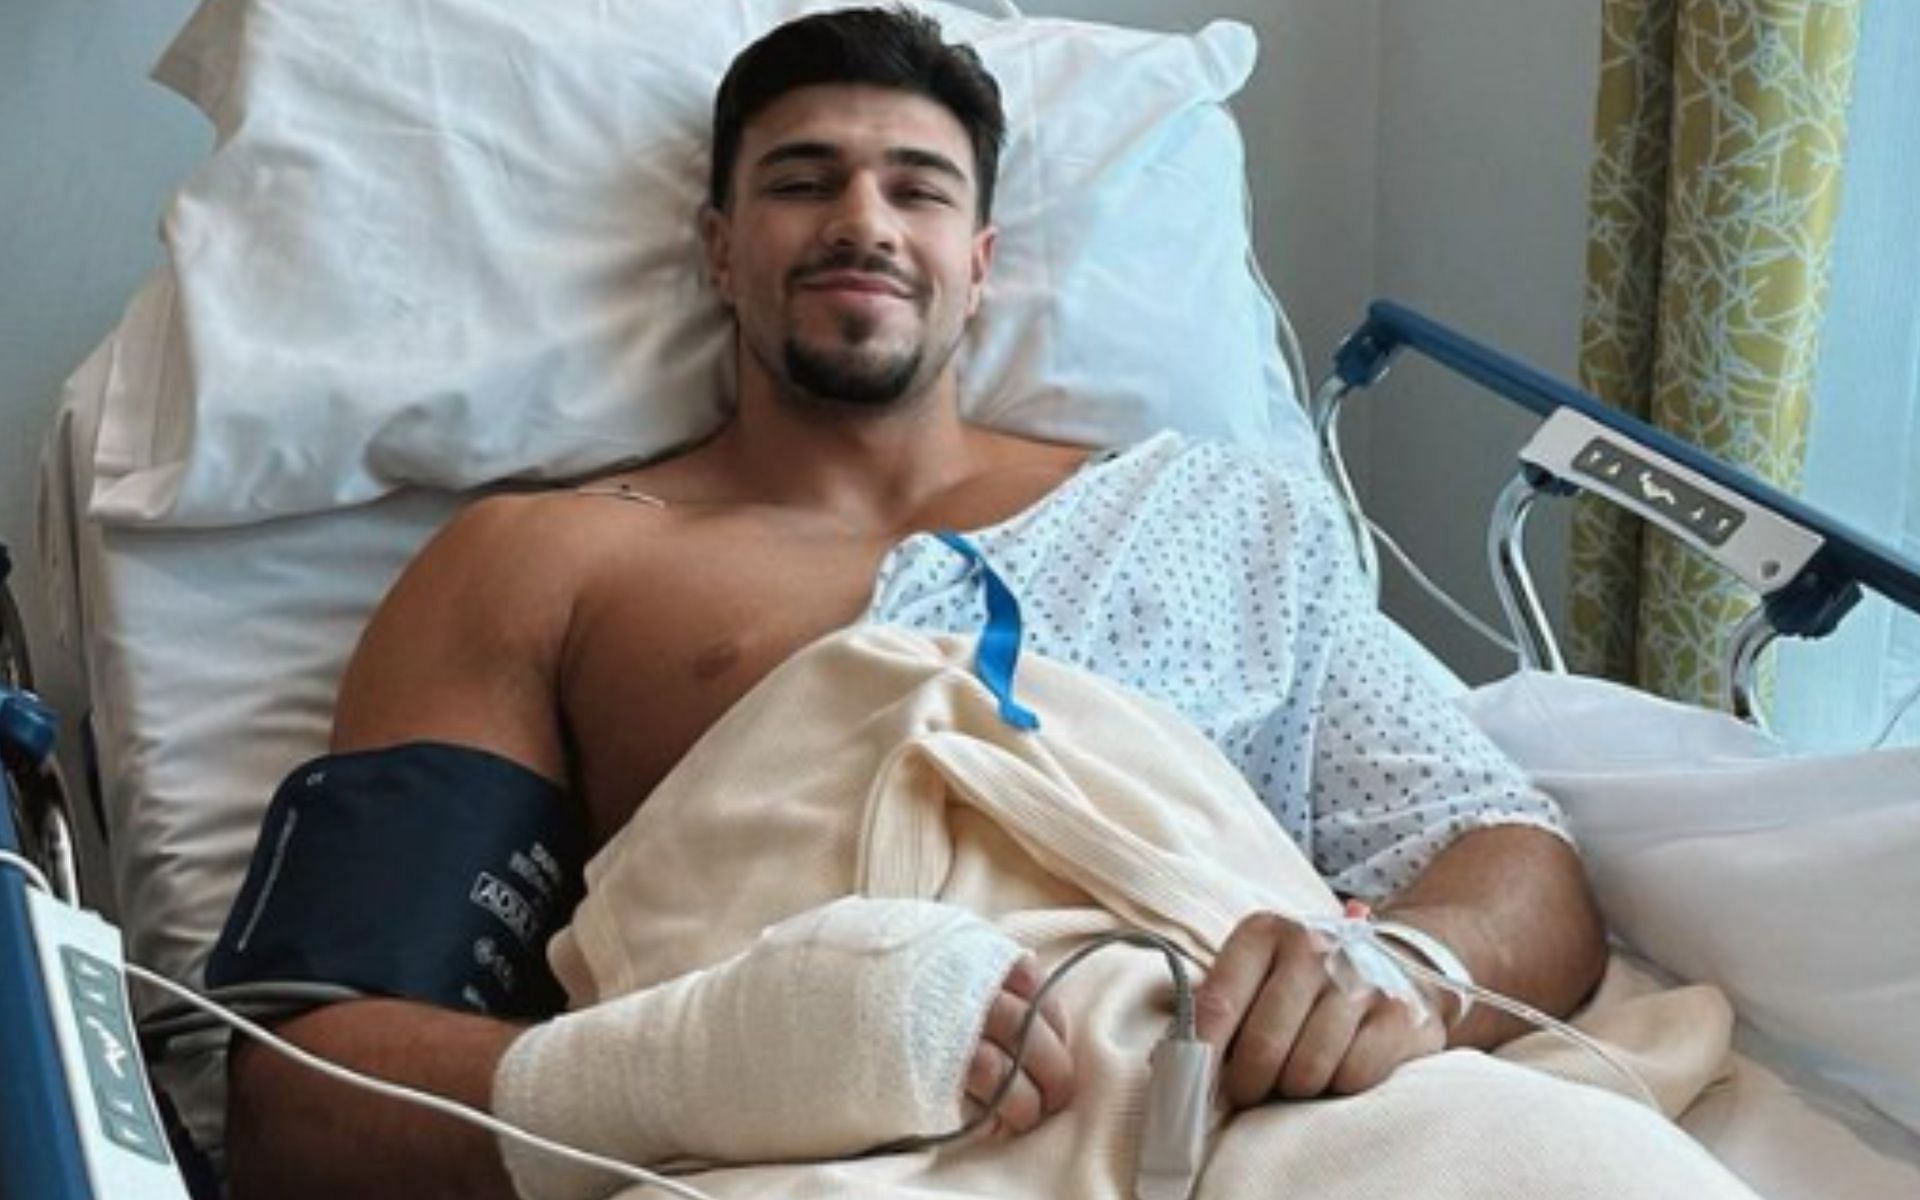 Tommy Fury recently underwent hand surgery. [image via @TommyFury on Instagram]